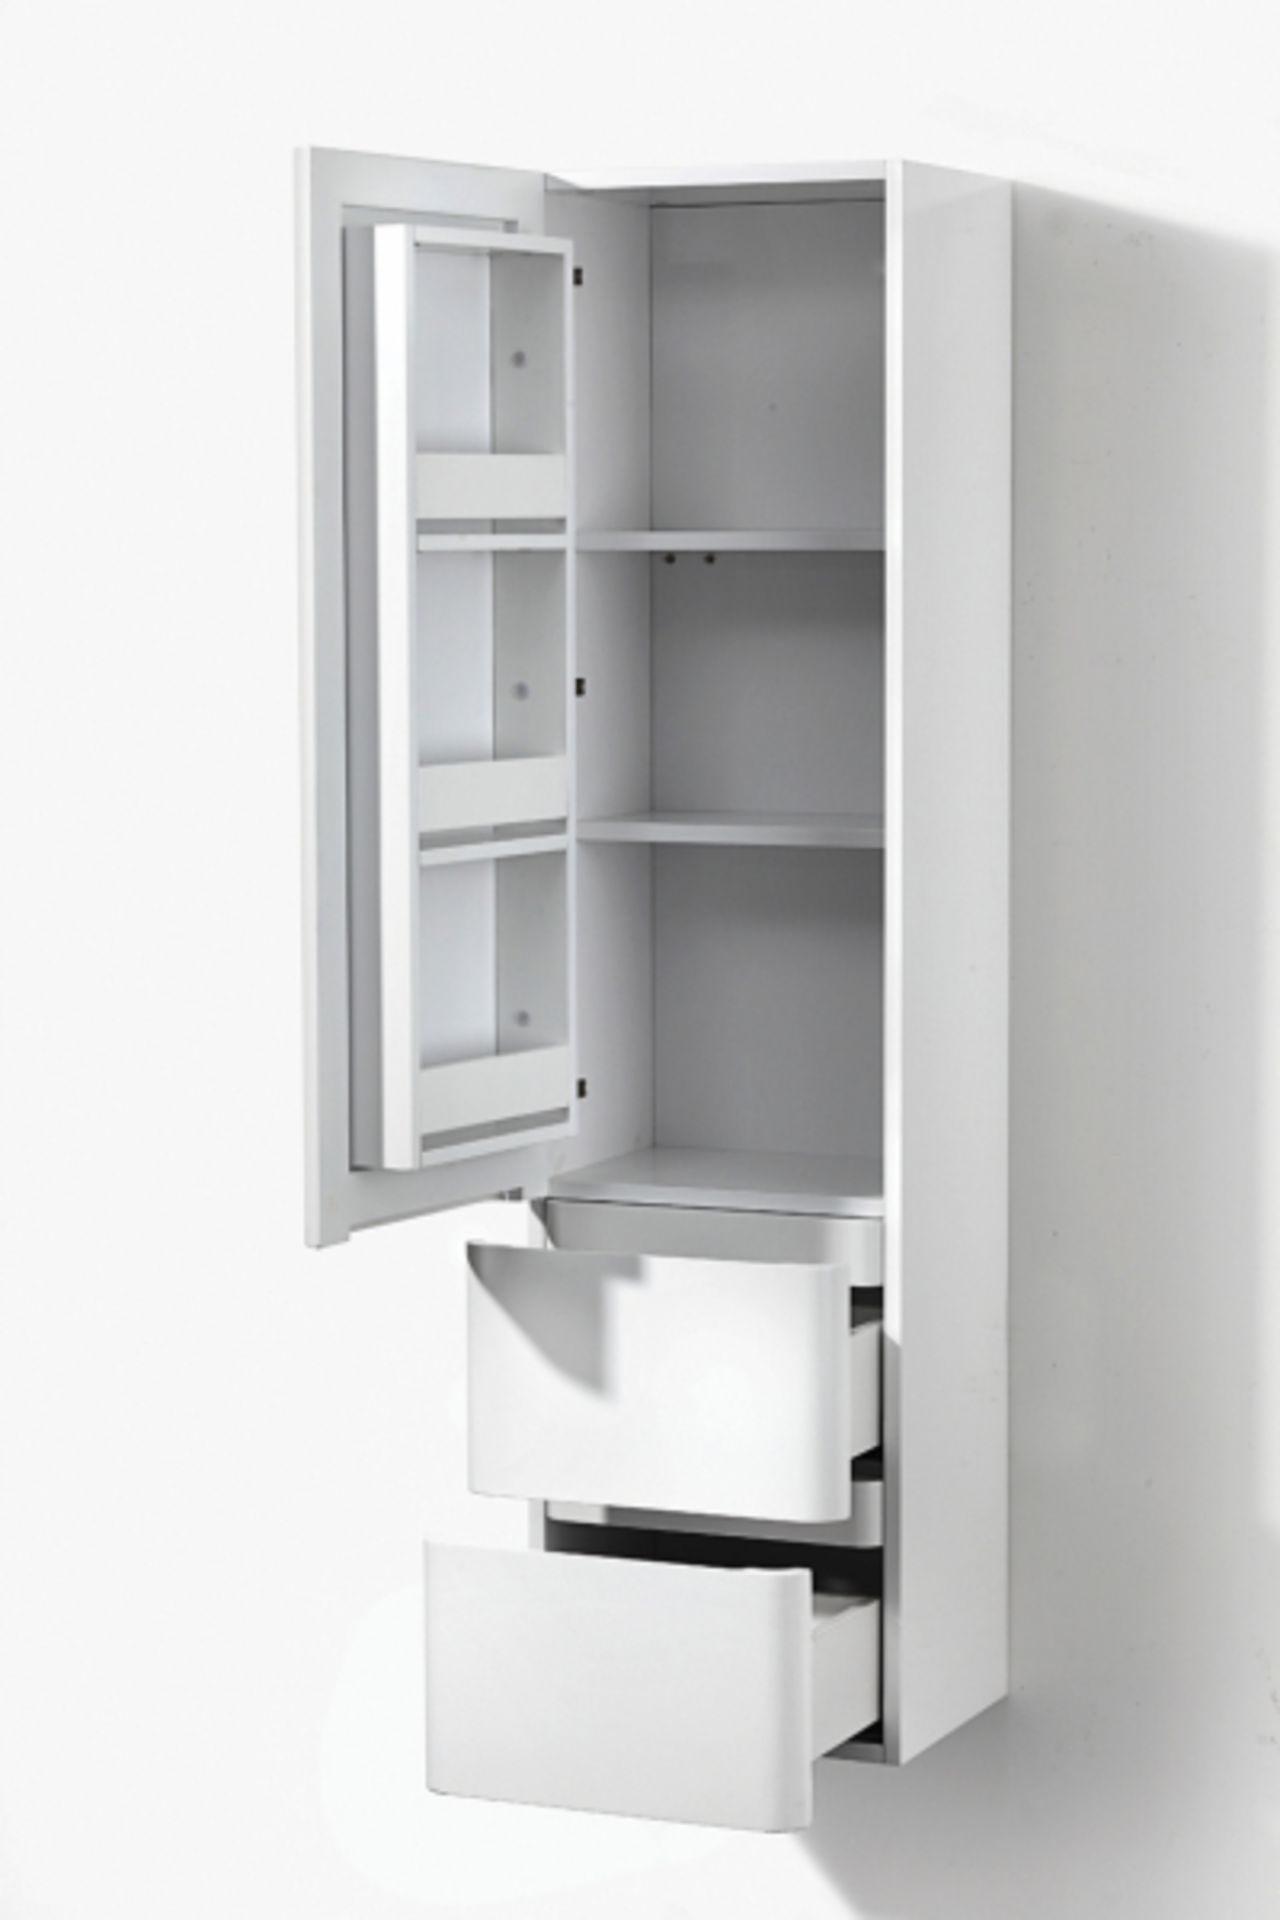 1 x White Gloss Storage Cabinet 155 - A-Grade - Ref:ASC41-155 - CL170 - Location: Nottingham NG2 - - Image 3 of 3